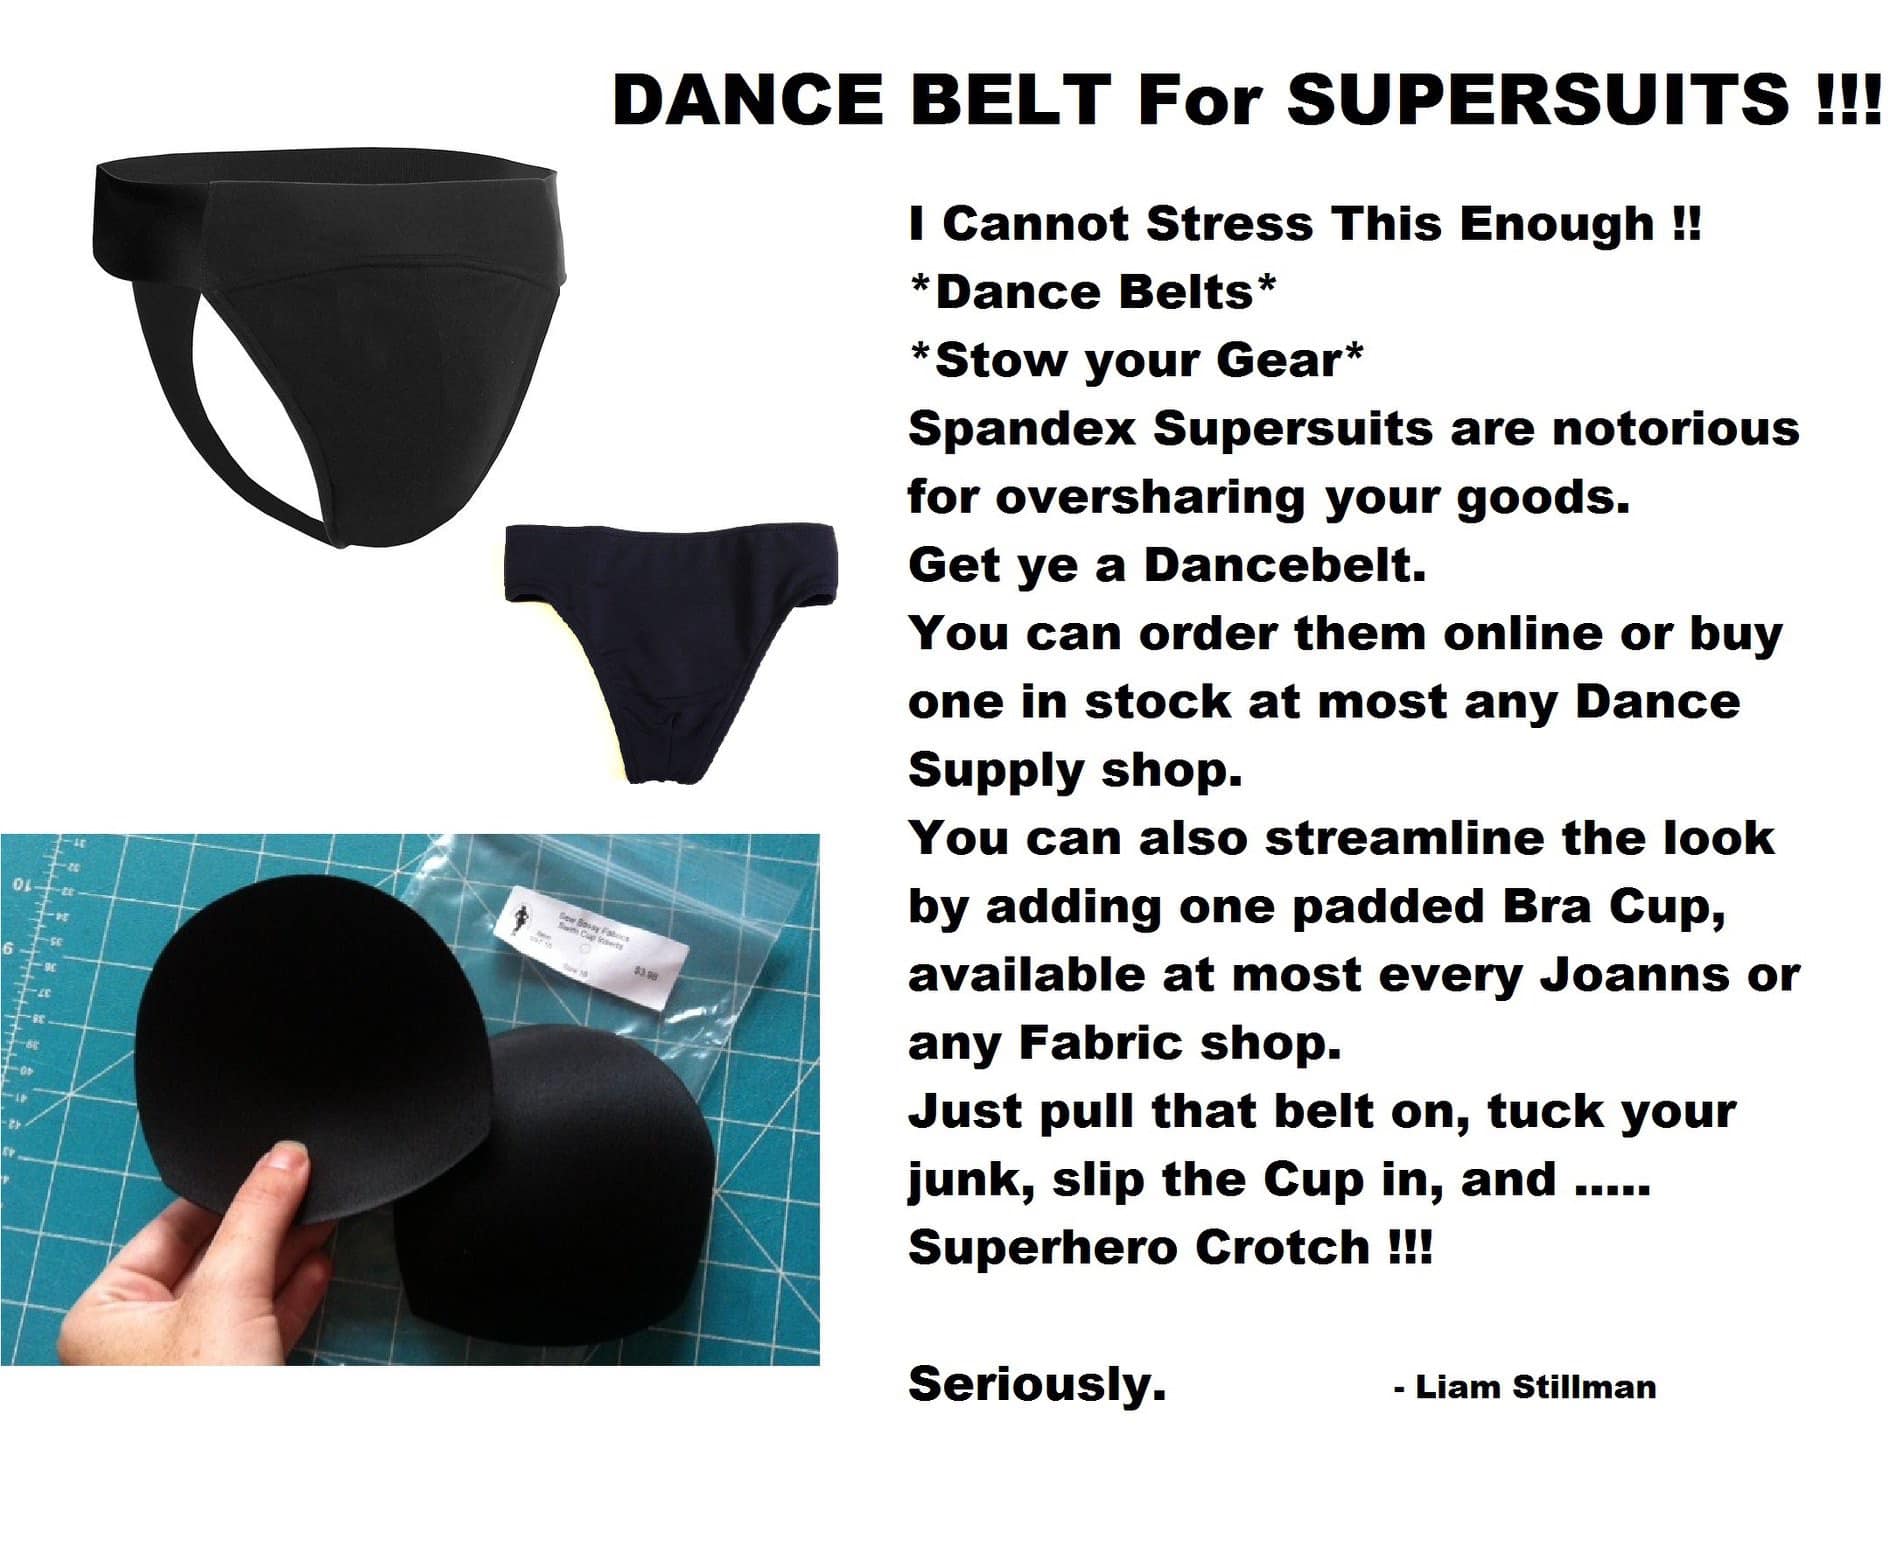 Spider-Menace on X: A little PSA for the con cosplayers. Dance Belt. Wear  one! And before you ask where to get one, literally type in Dance Belt on  . Done! #Dancebelt #Coveritup #